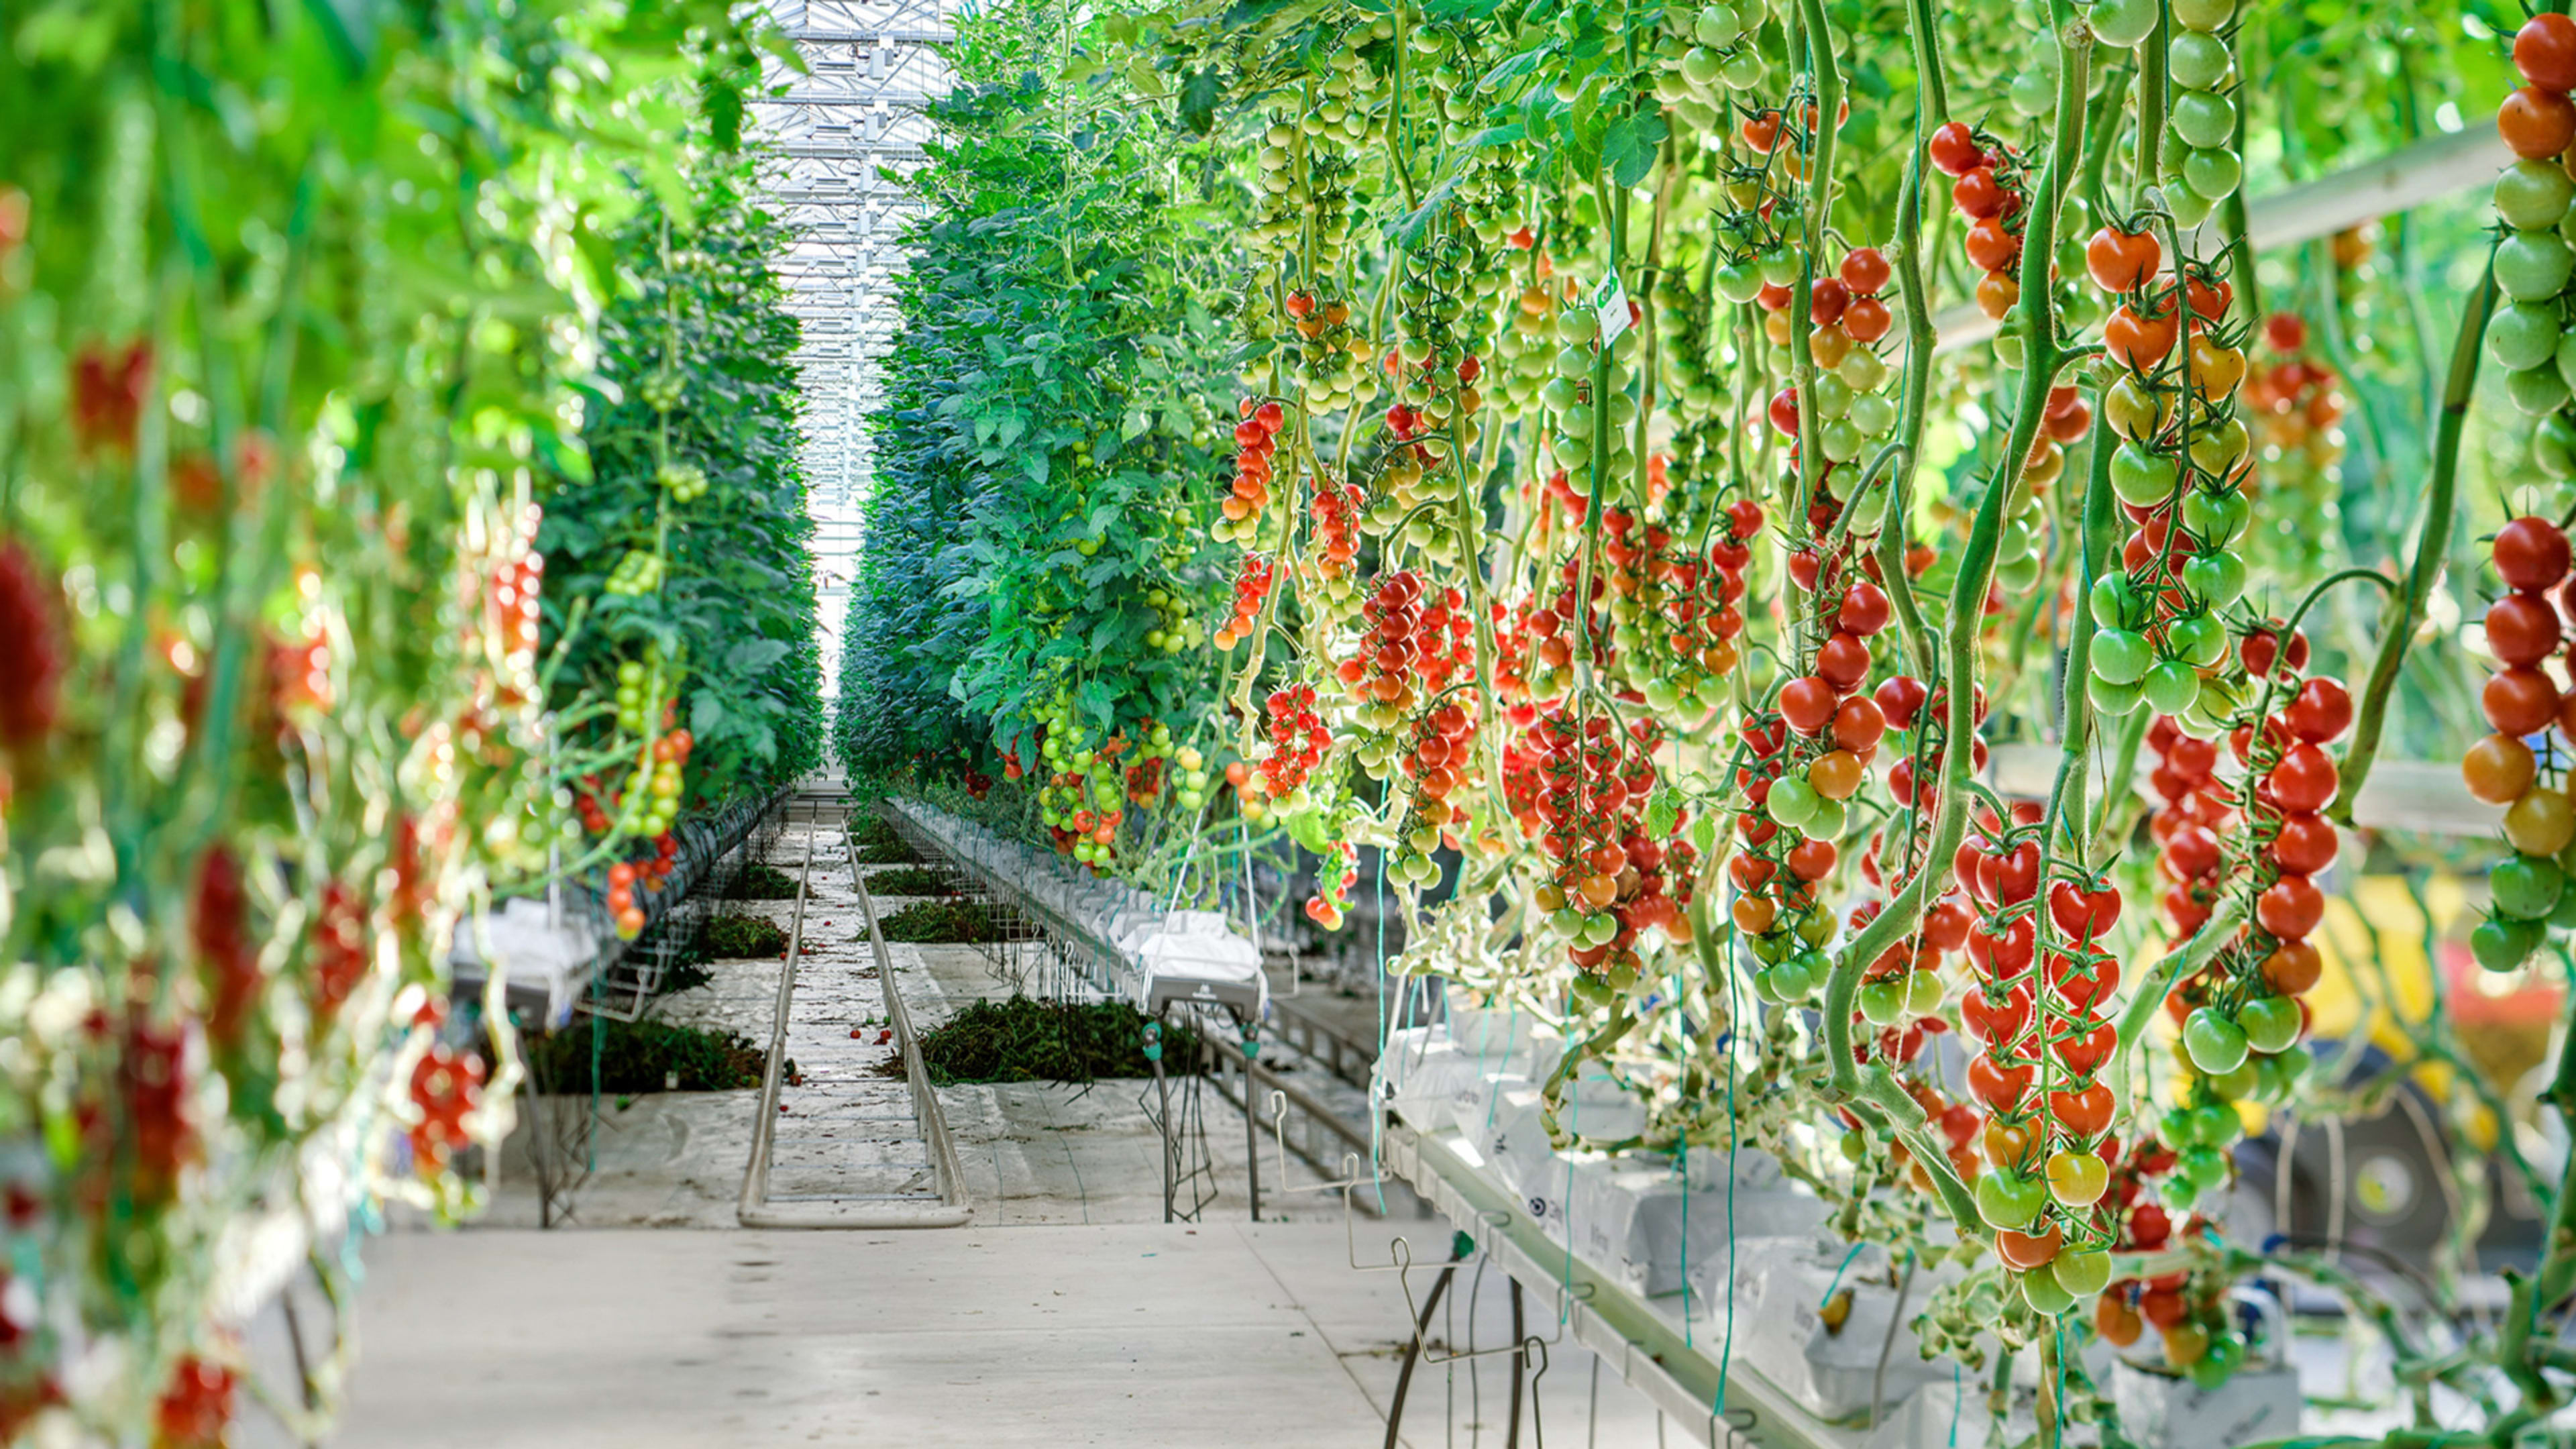 This Midwestern Greenhouse Has Perfected The Art Of Growing Quality Tomatoes Year-Round